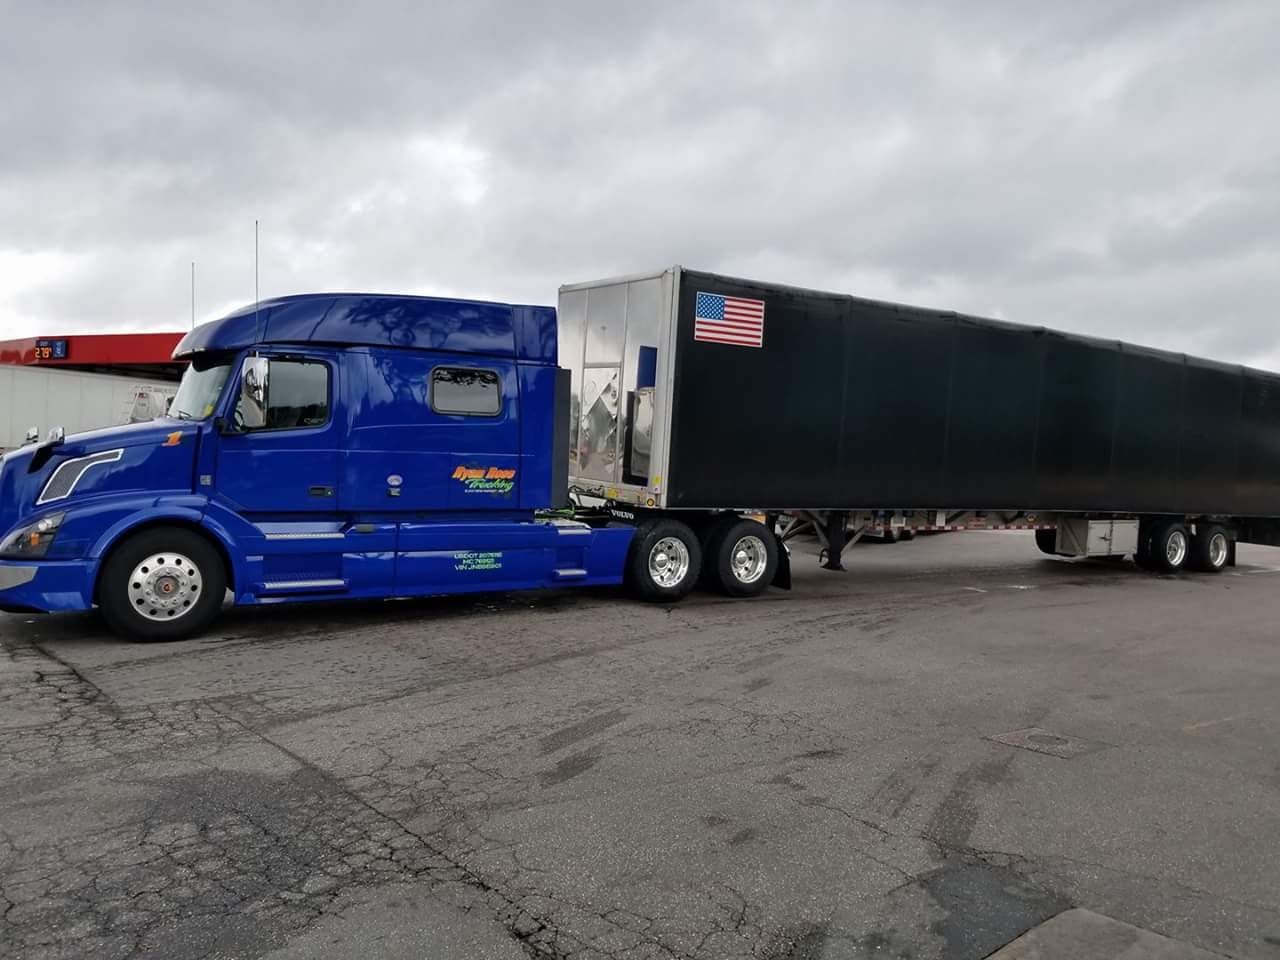 A blue semi truck with a black trailer is parked in a parking lot